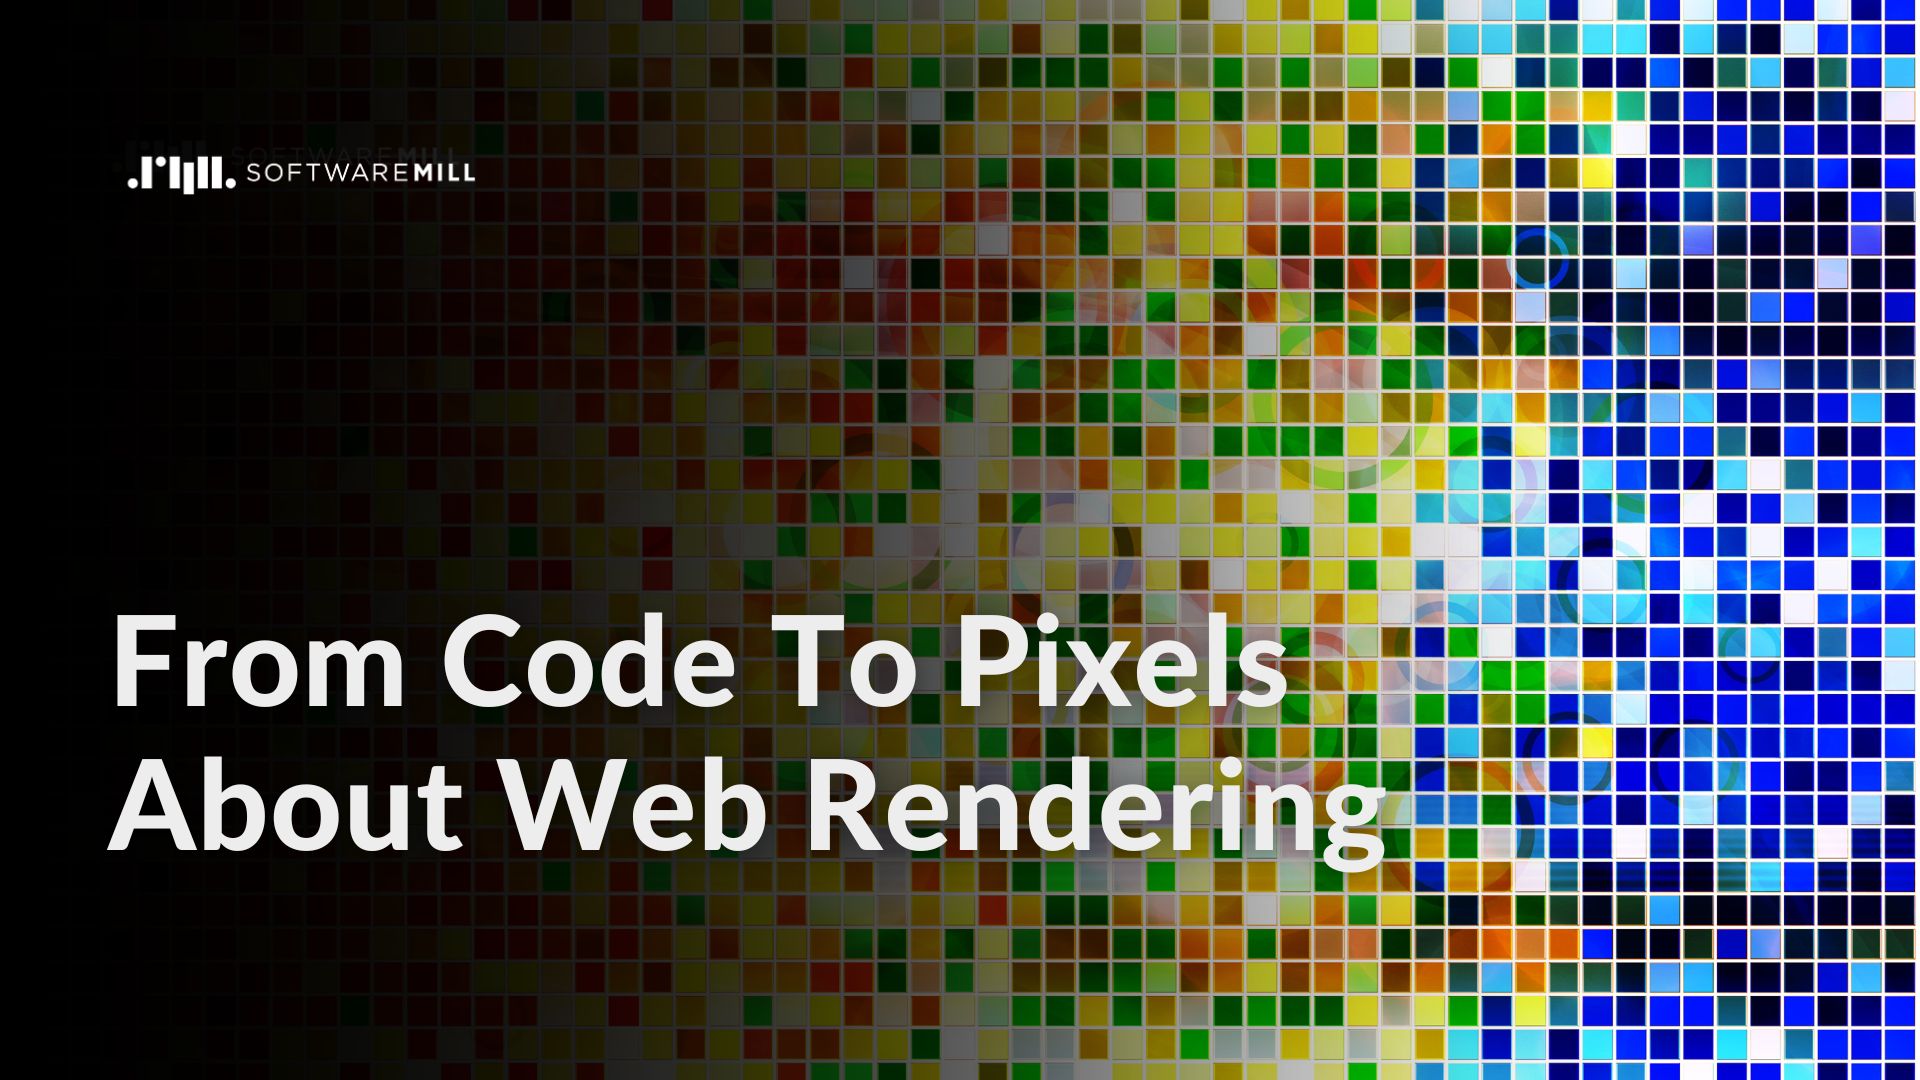 From Code To Pixels. About Web Rendering webp image